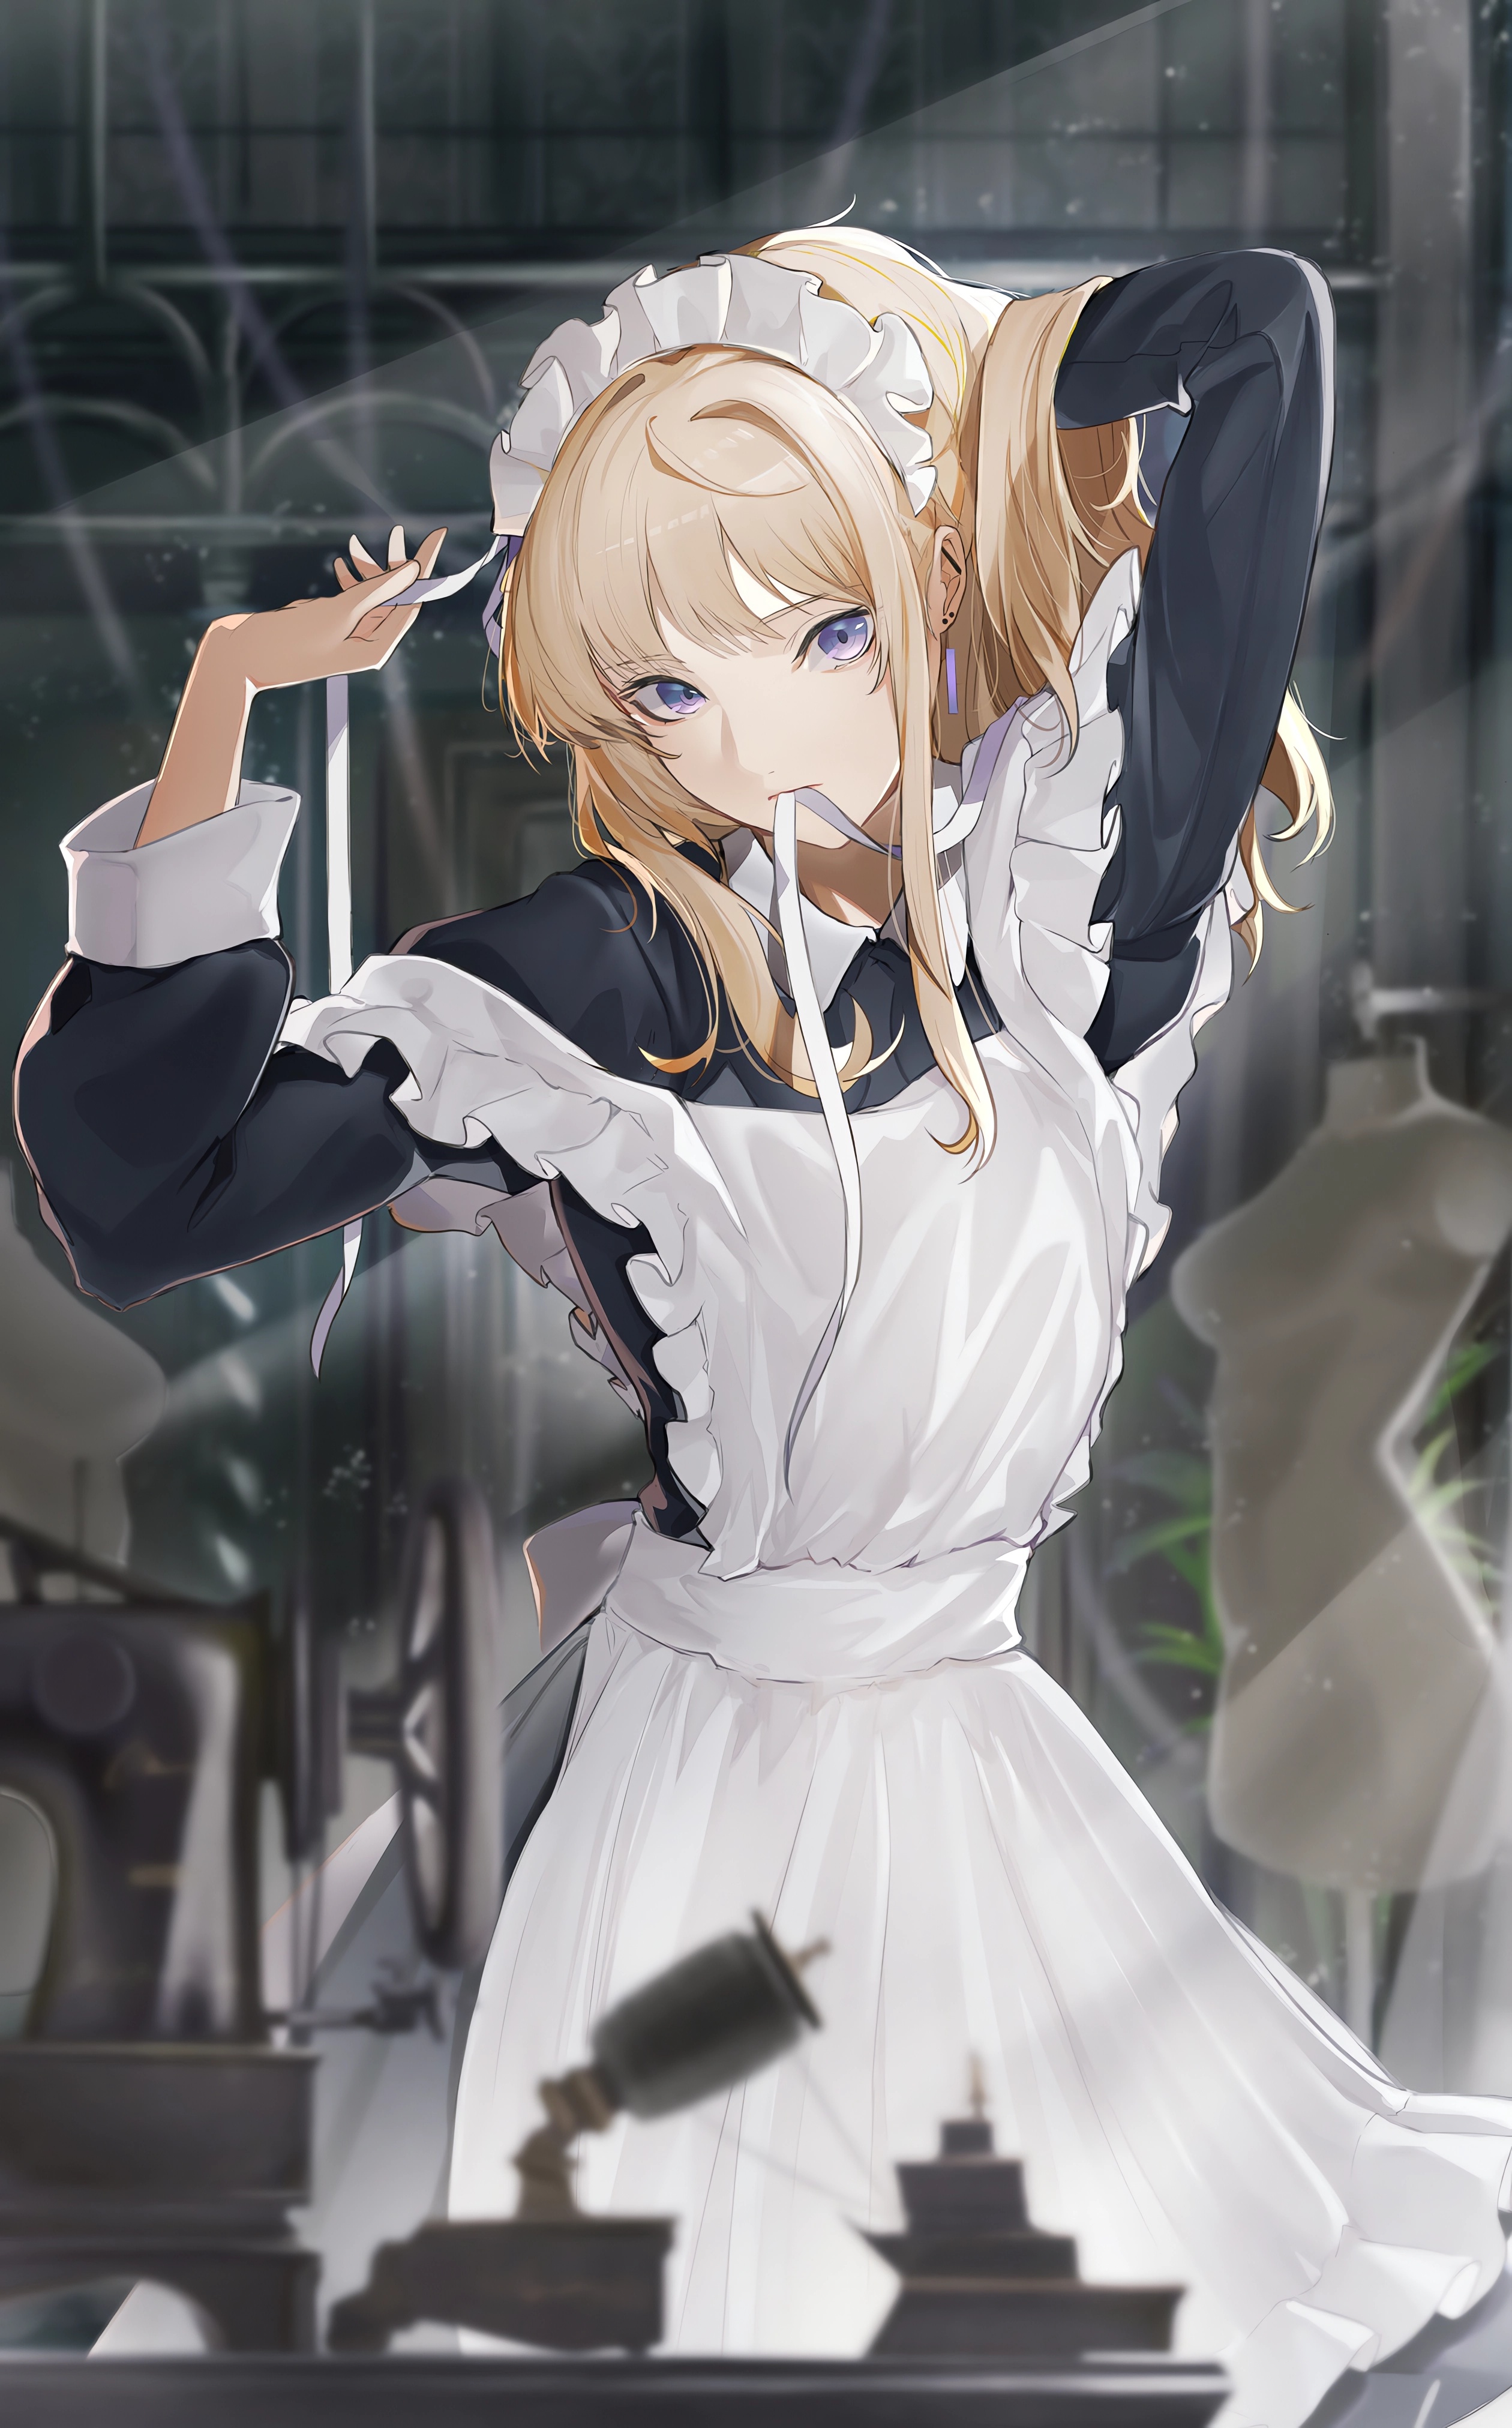 Anime 2520x4046 anime anime girls Pixiv portrait display maid maid outfit blonde blue eyes looking at viewer leaves mannequin sunlight hands in hair